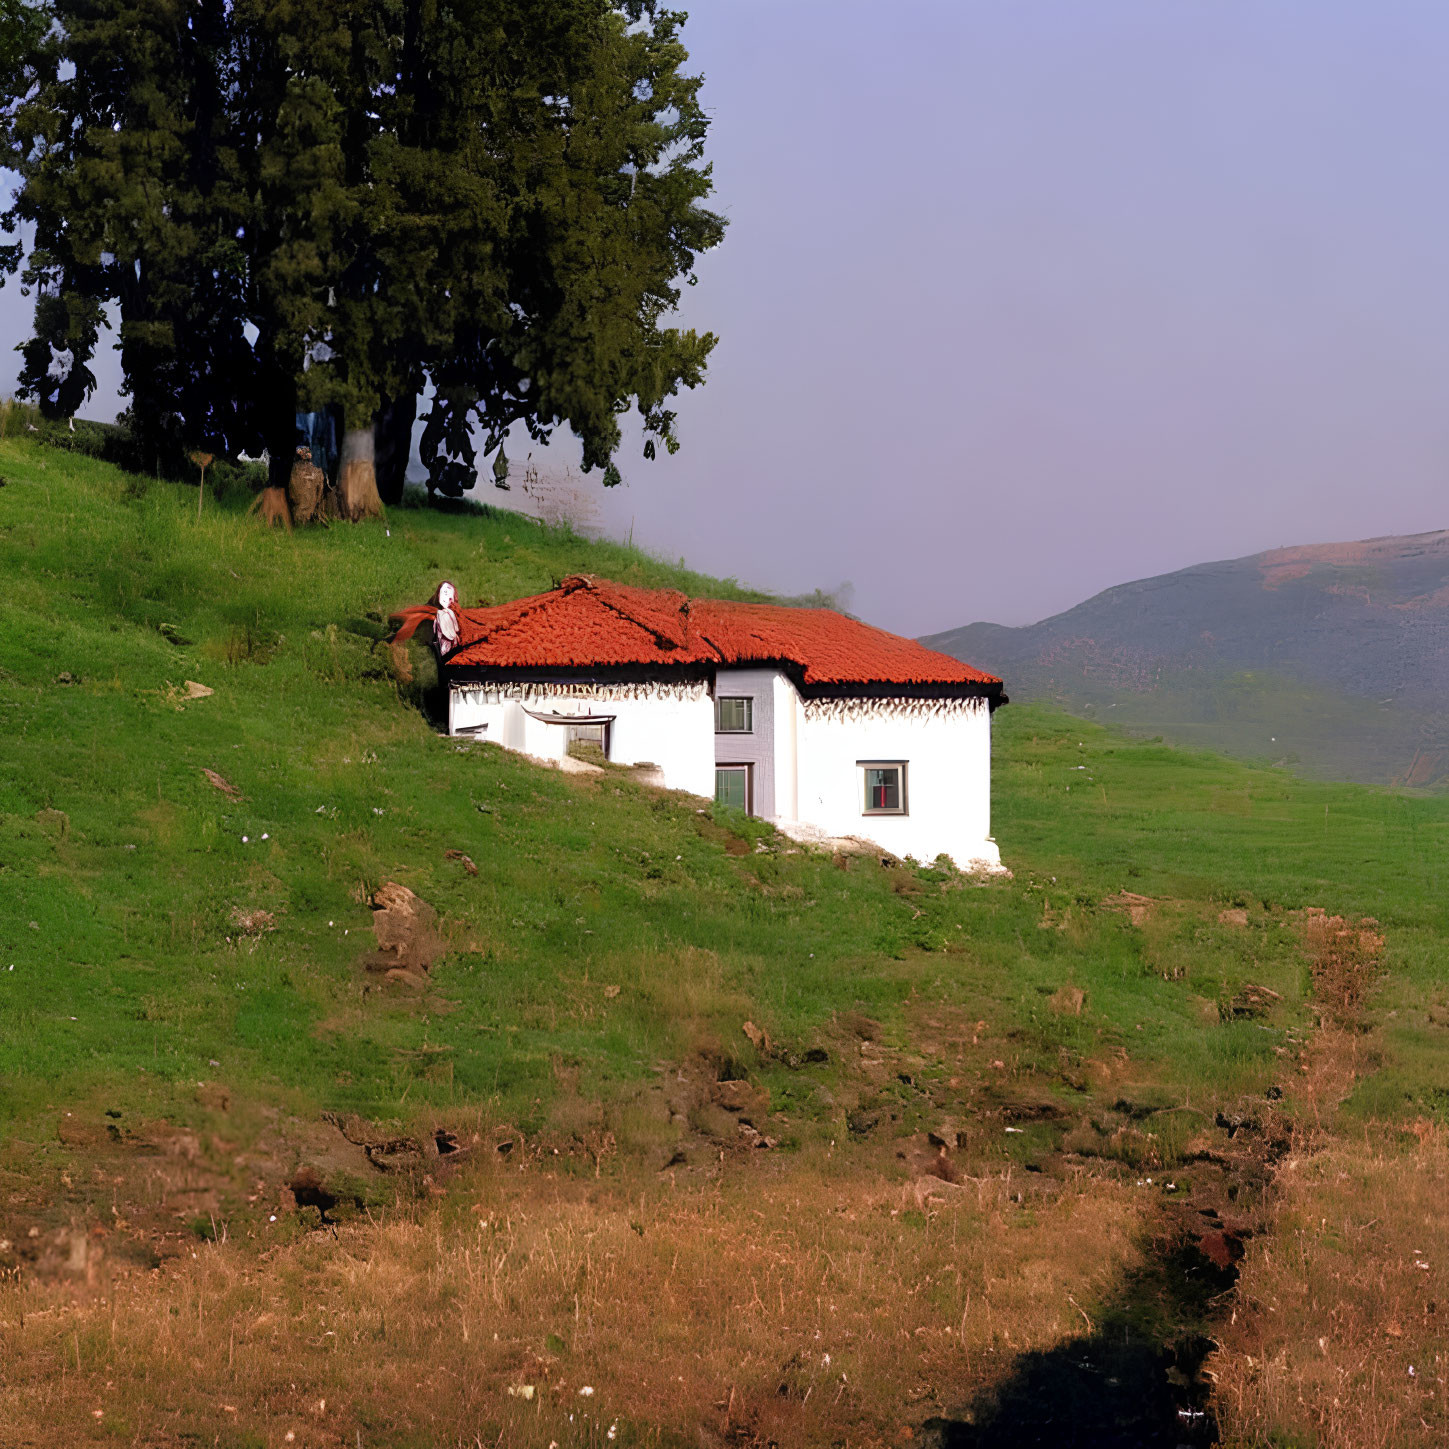 White rural house with red roof on green hillside, person sitting, trees, blue sky